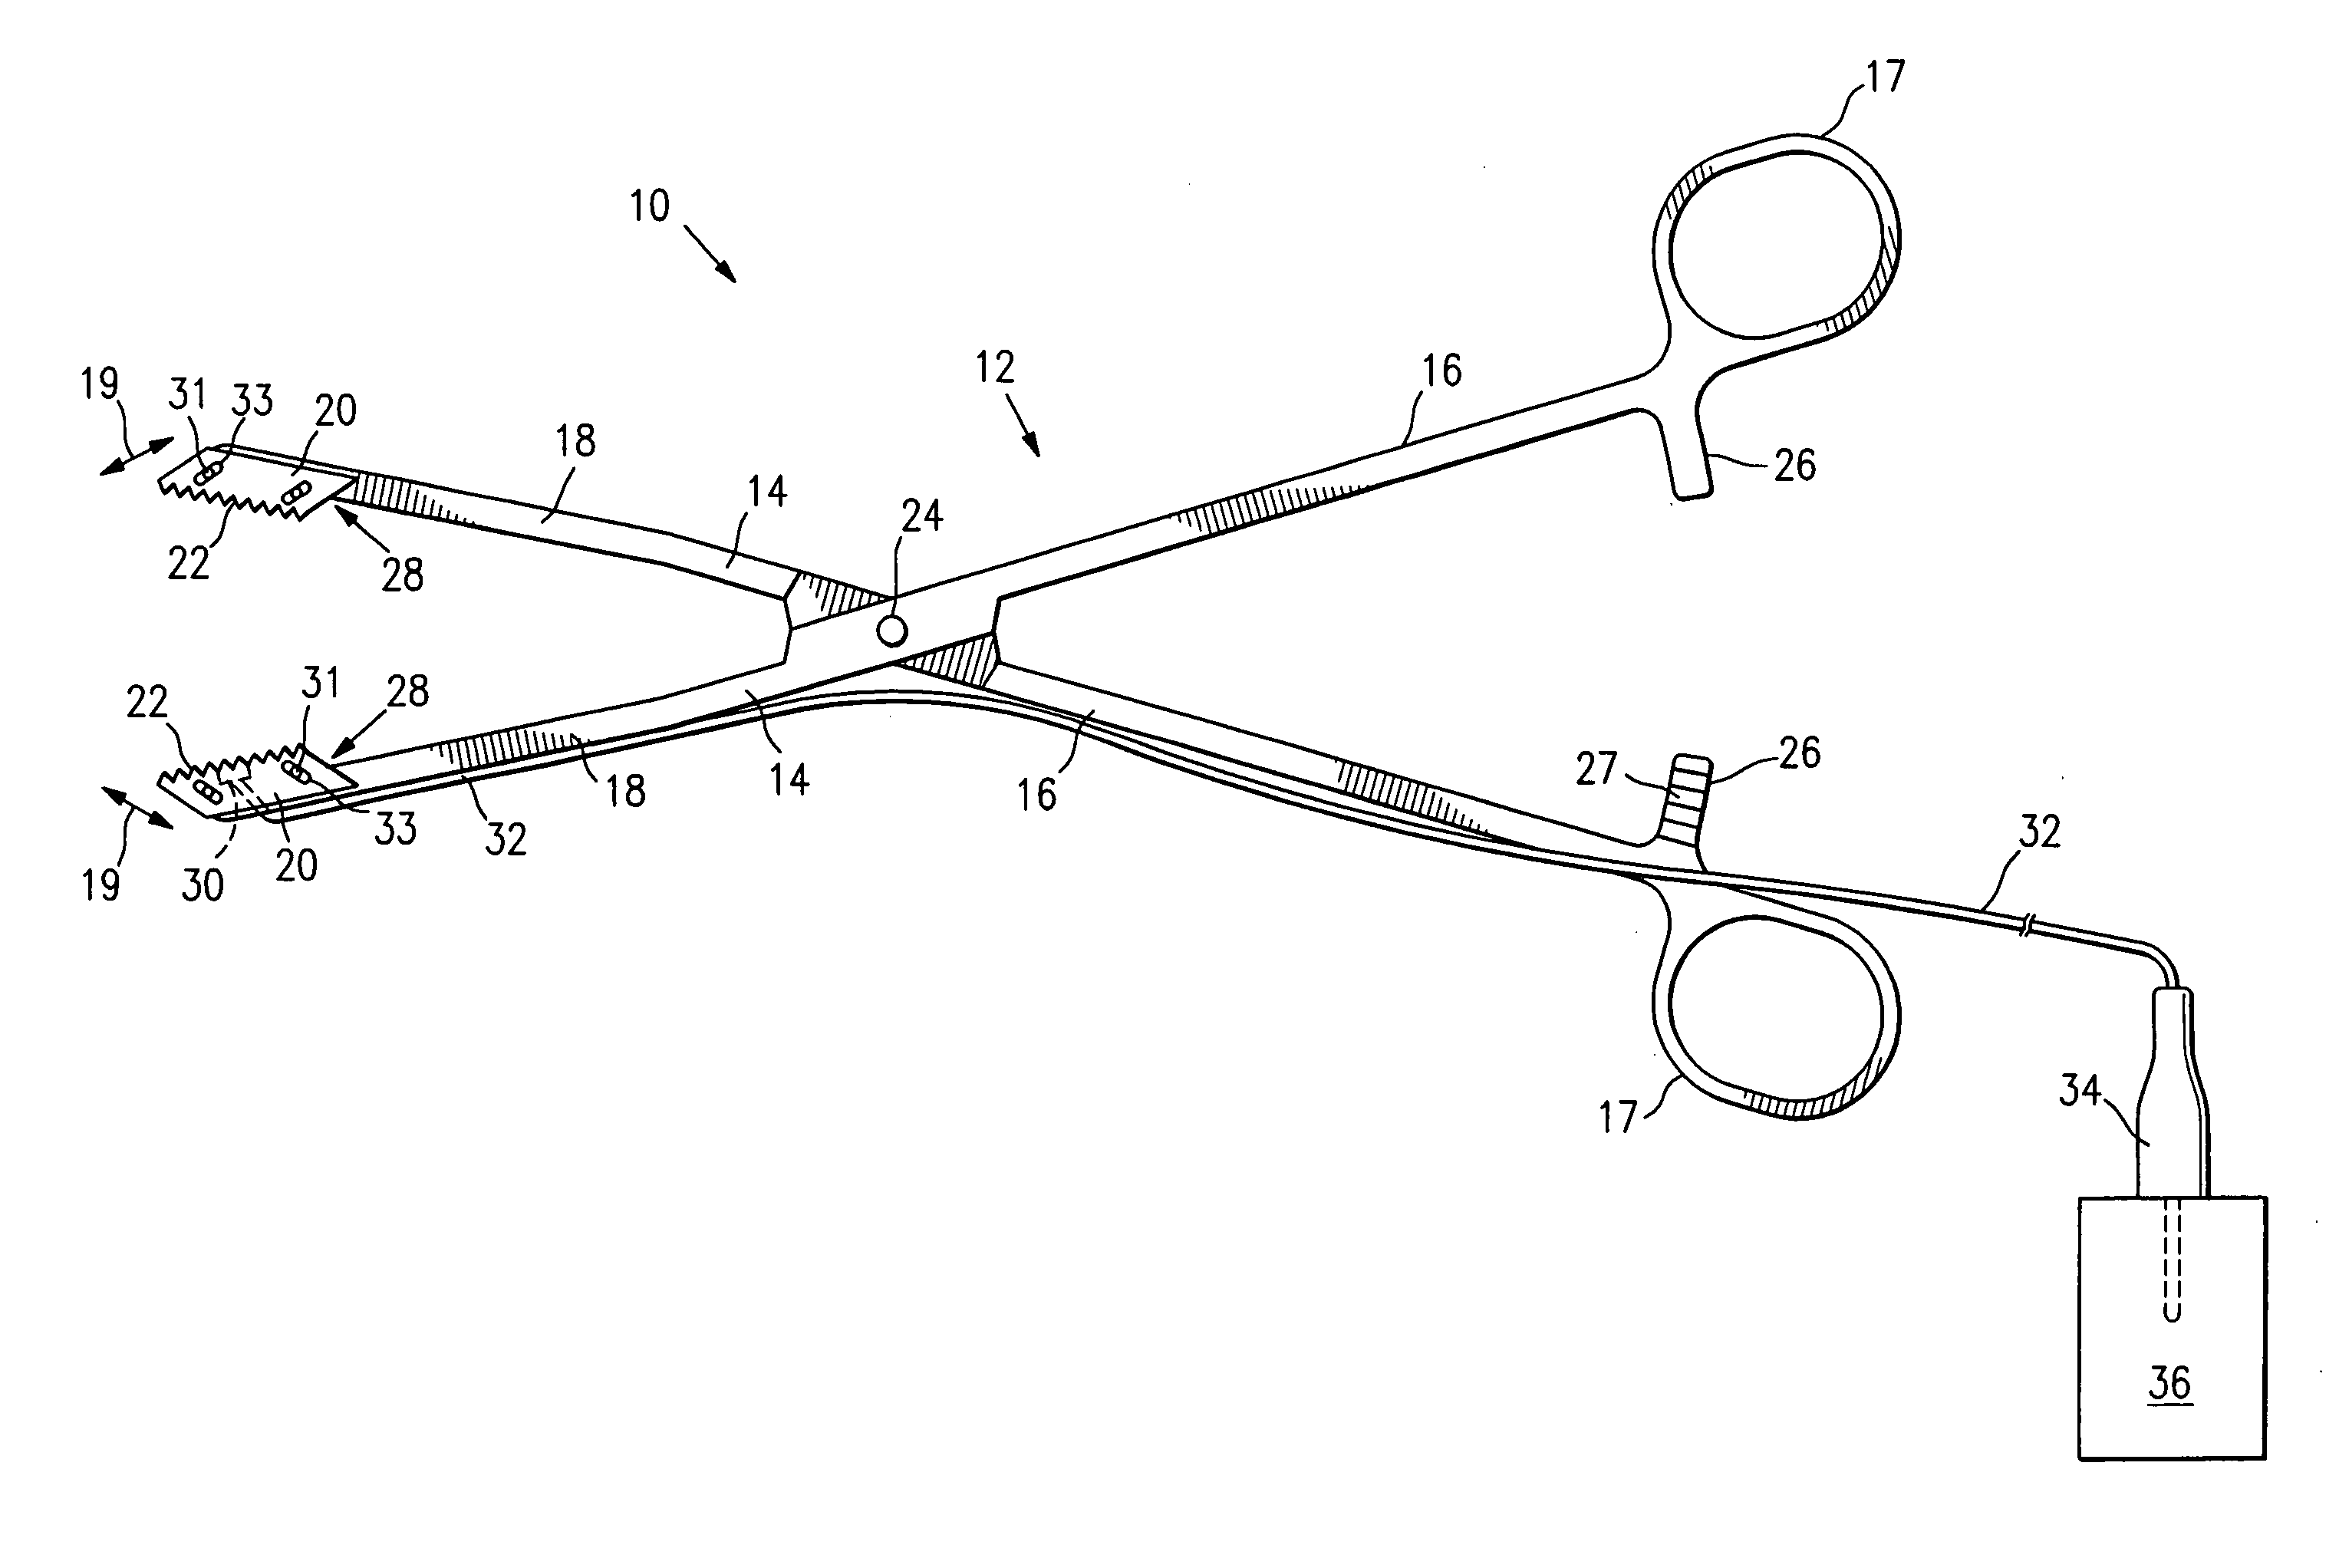 Vascular clamp for caesarian section